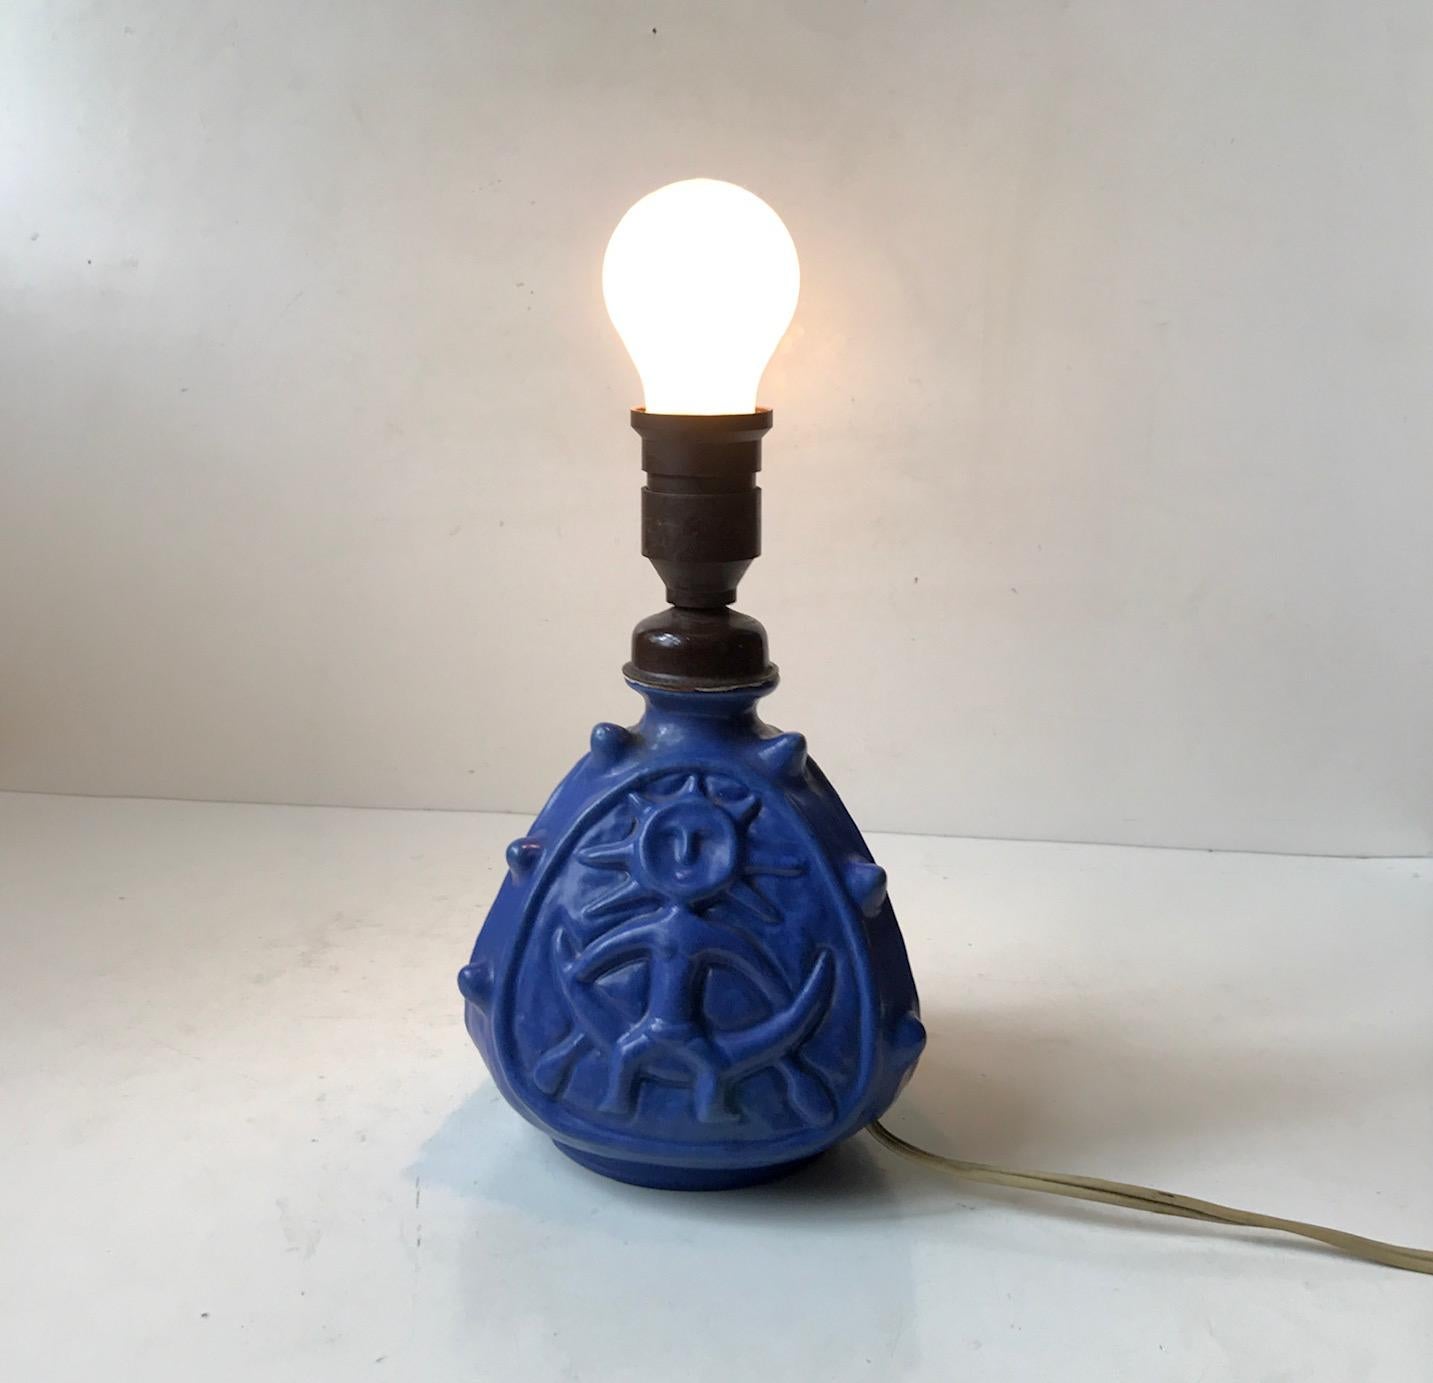 Spiky Blue Ceramic Table Lamp with Troll by Lauritz Hjorth, 1940s For Sale 2